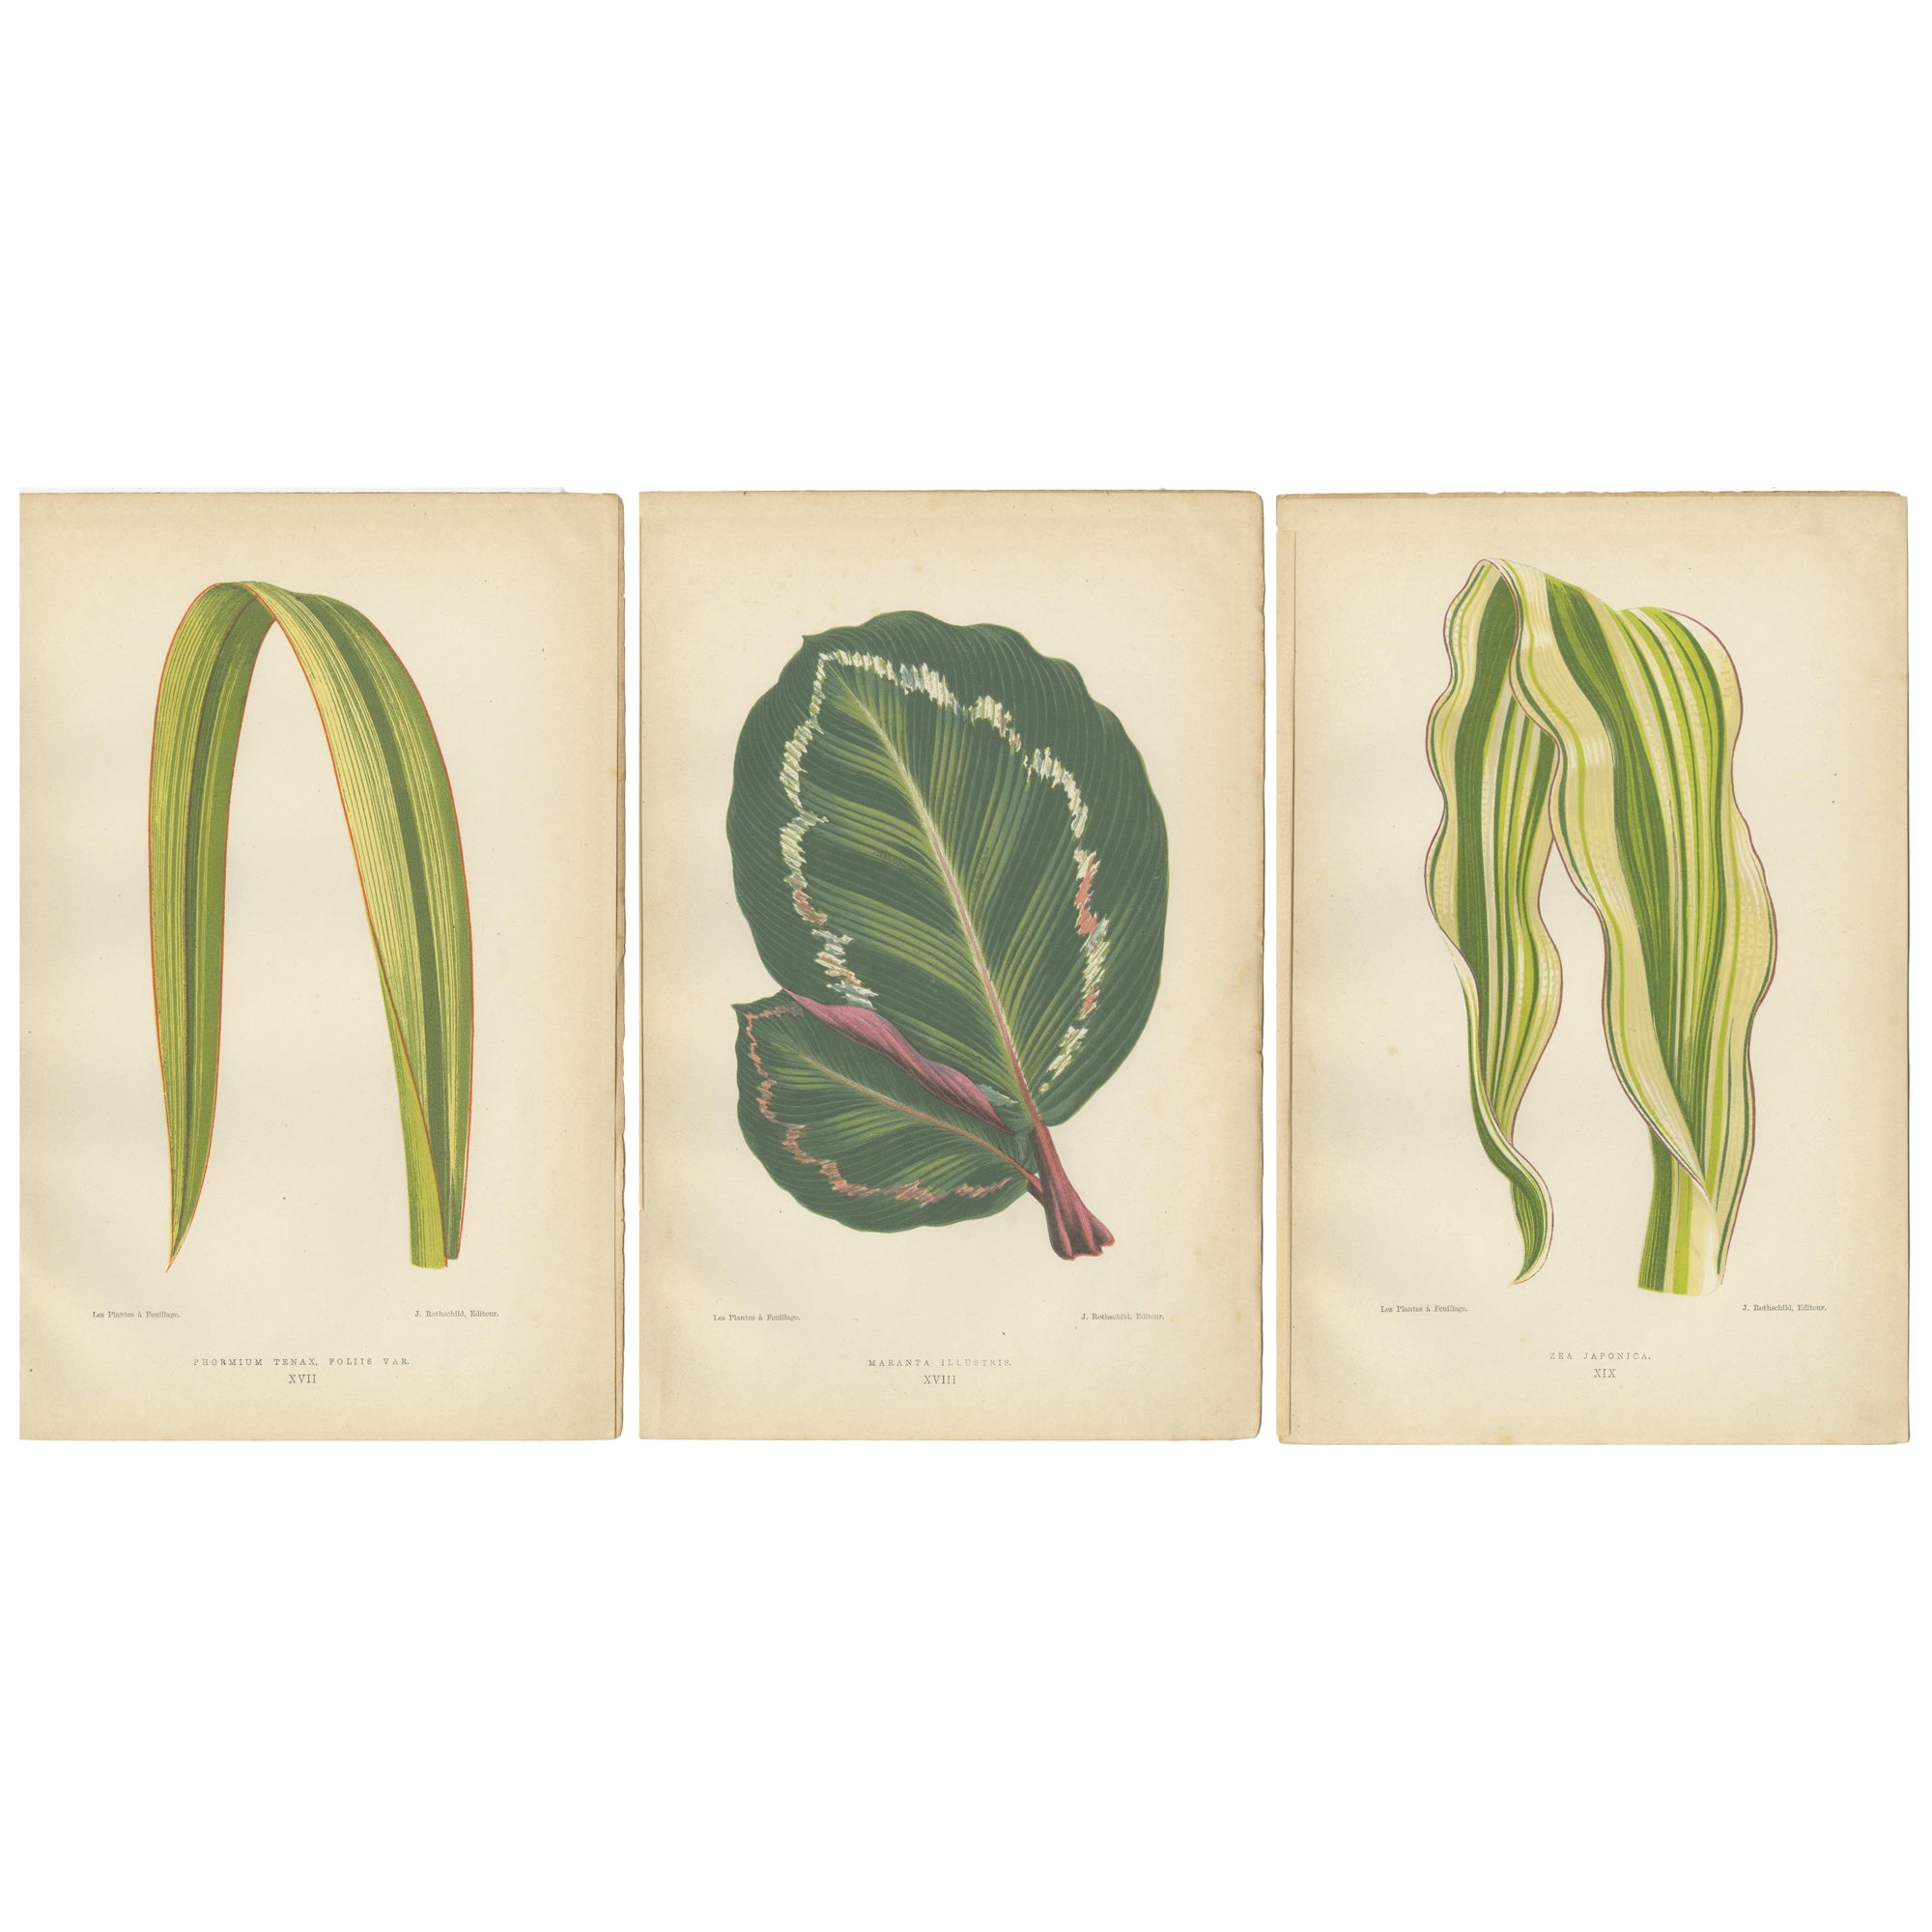 Variegated Elegance: A Collection of 19th Century Botanical Prints